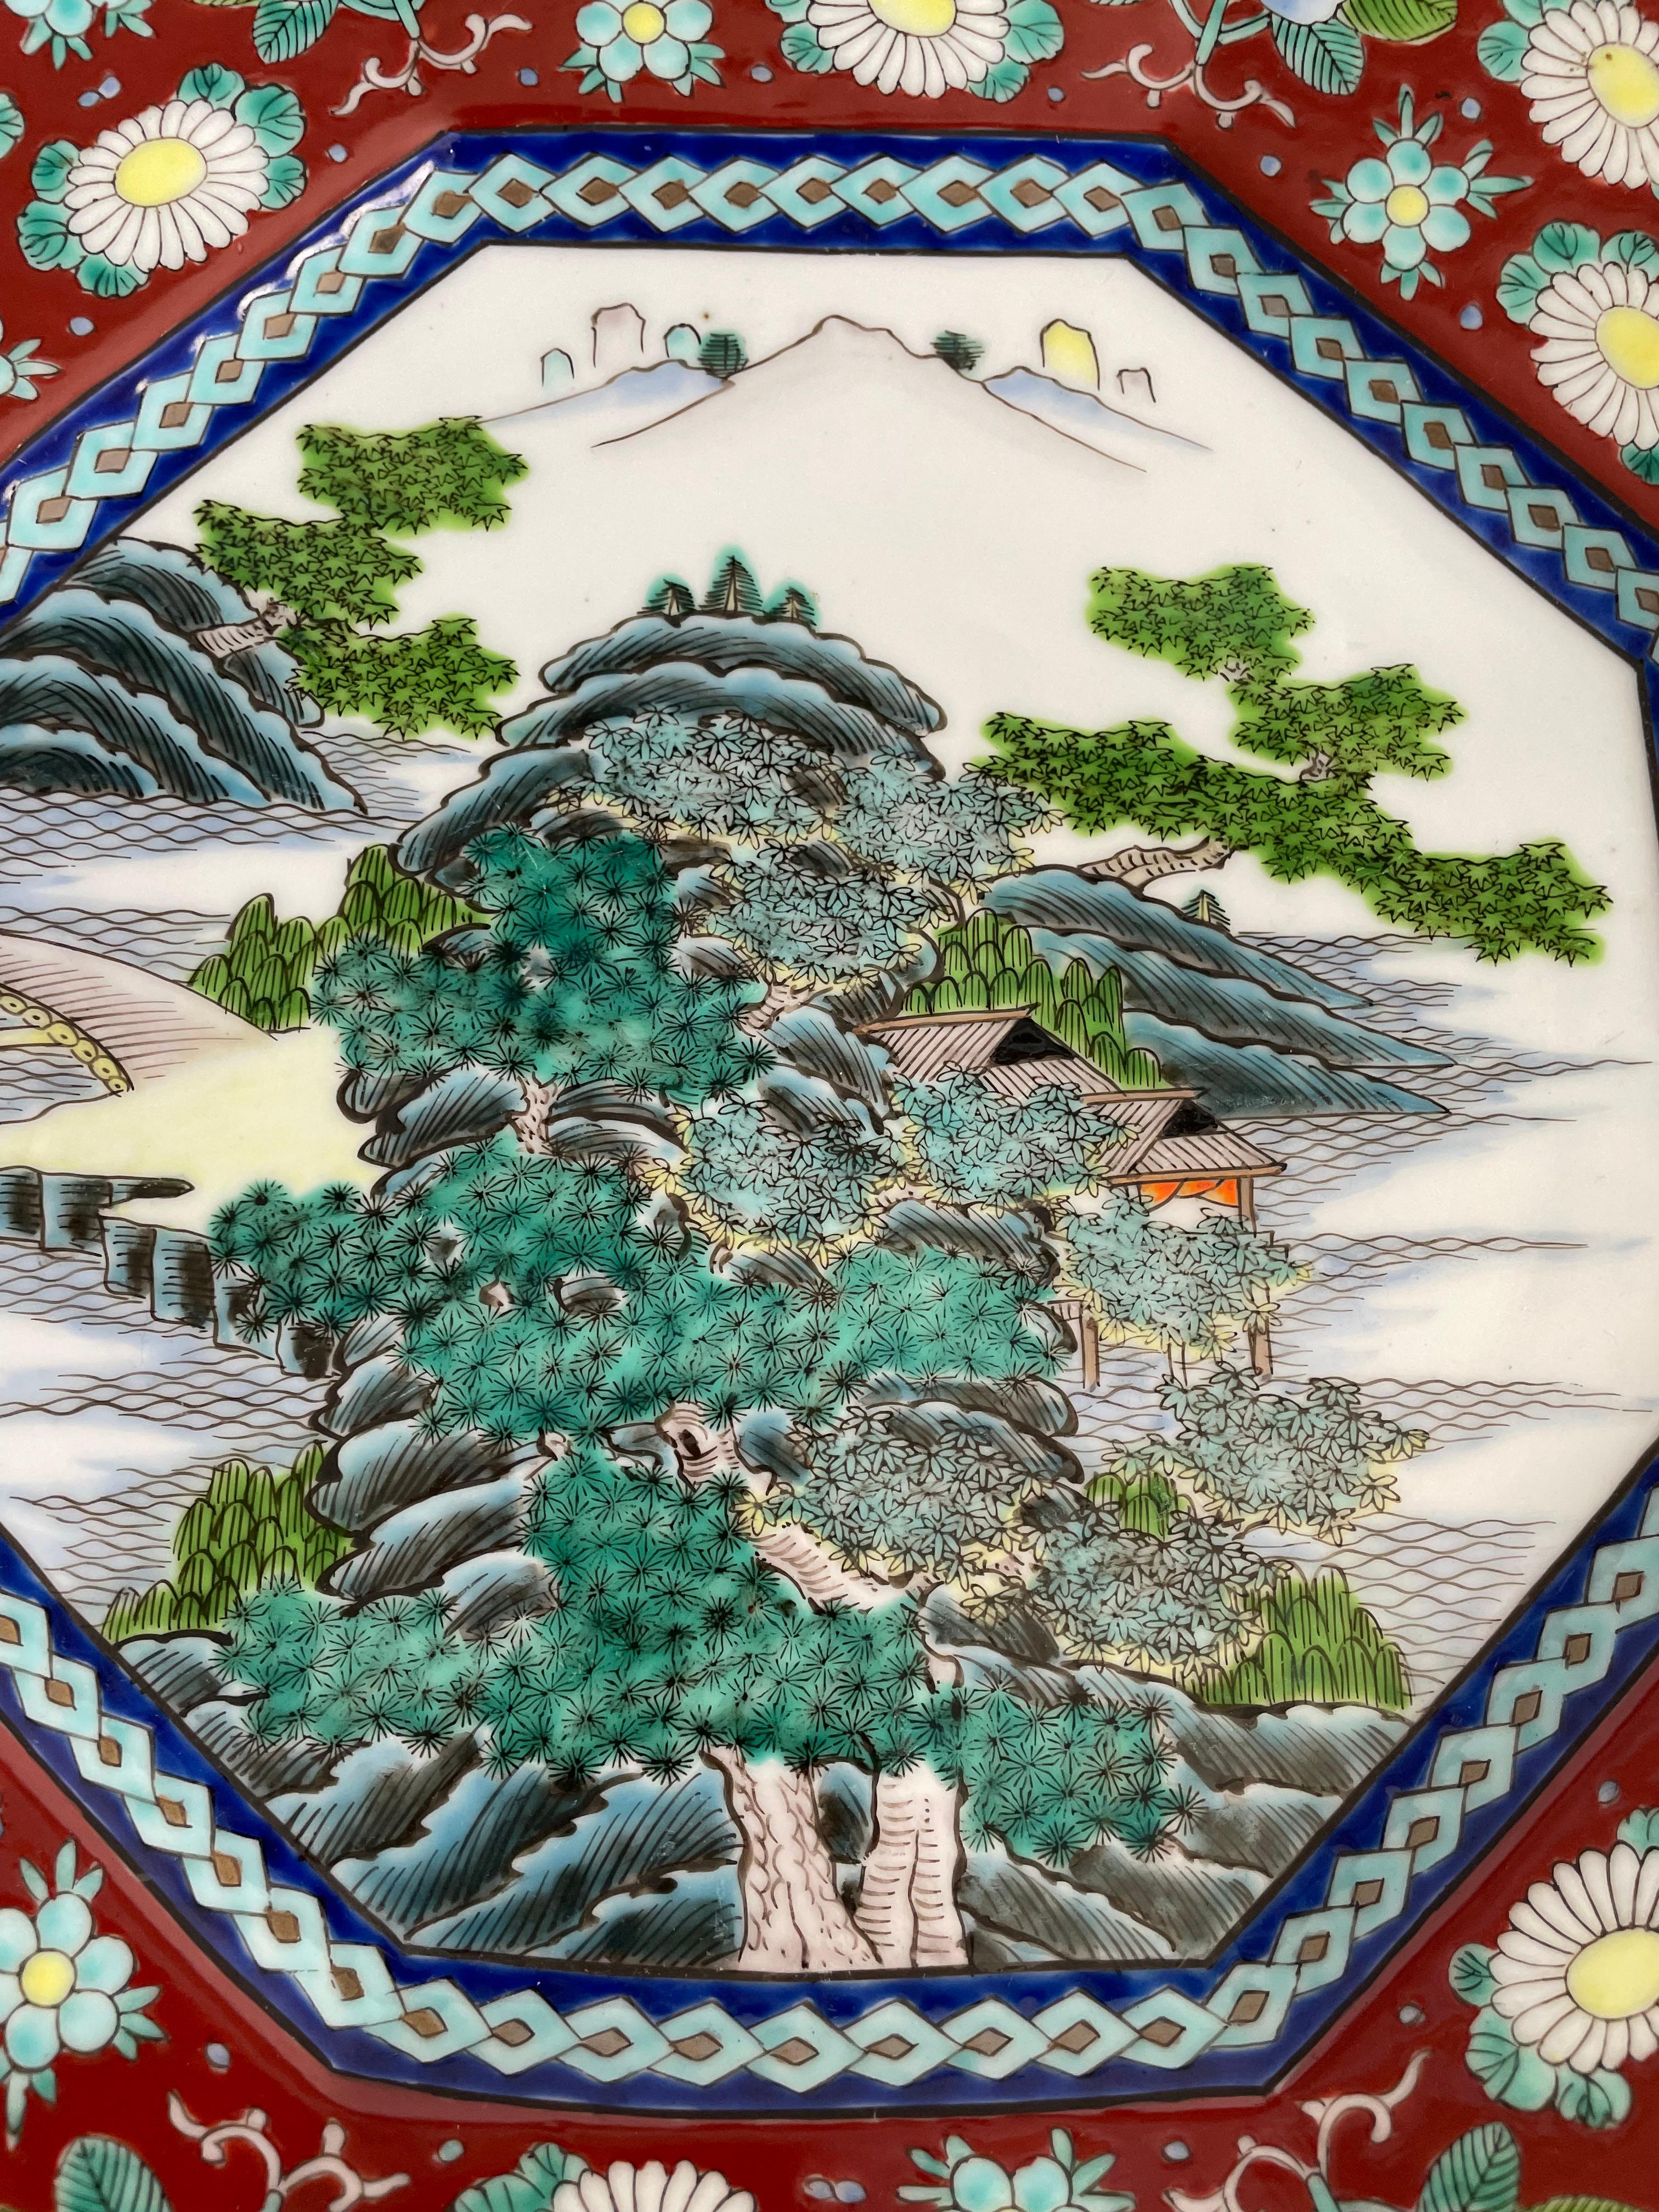 A decorative handpainted Japanese Imari octagonal ceramic charger, gilt edges, profusely decorated in vibrant shades or blue, red, green and yellow, featuring a rocky island with mature pine trees and a small shrine, connected by a causeway with